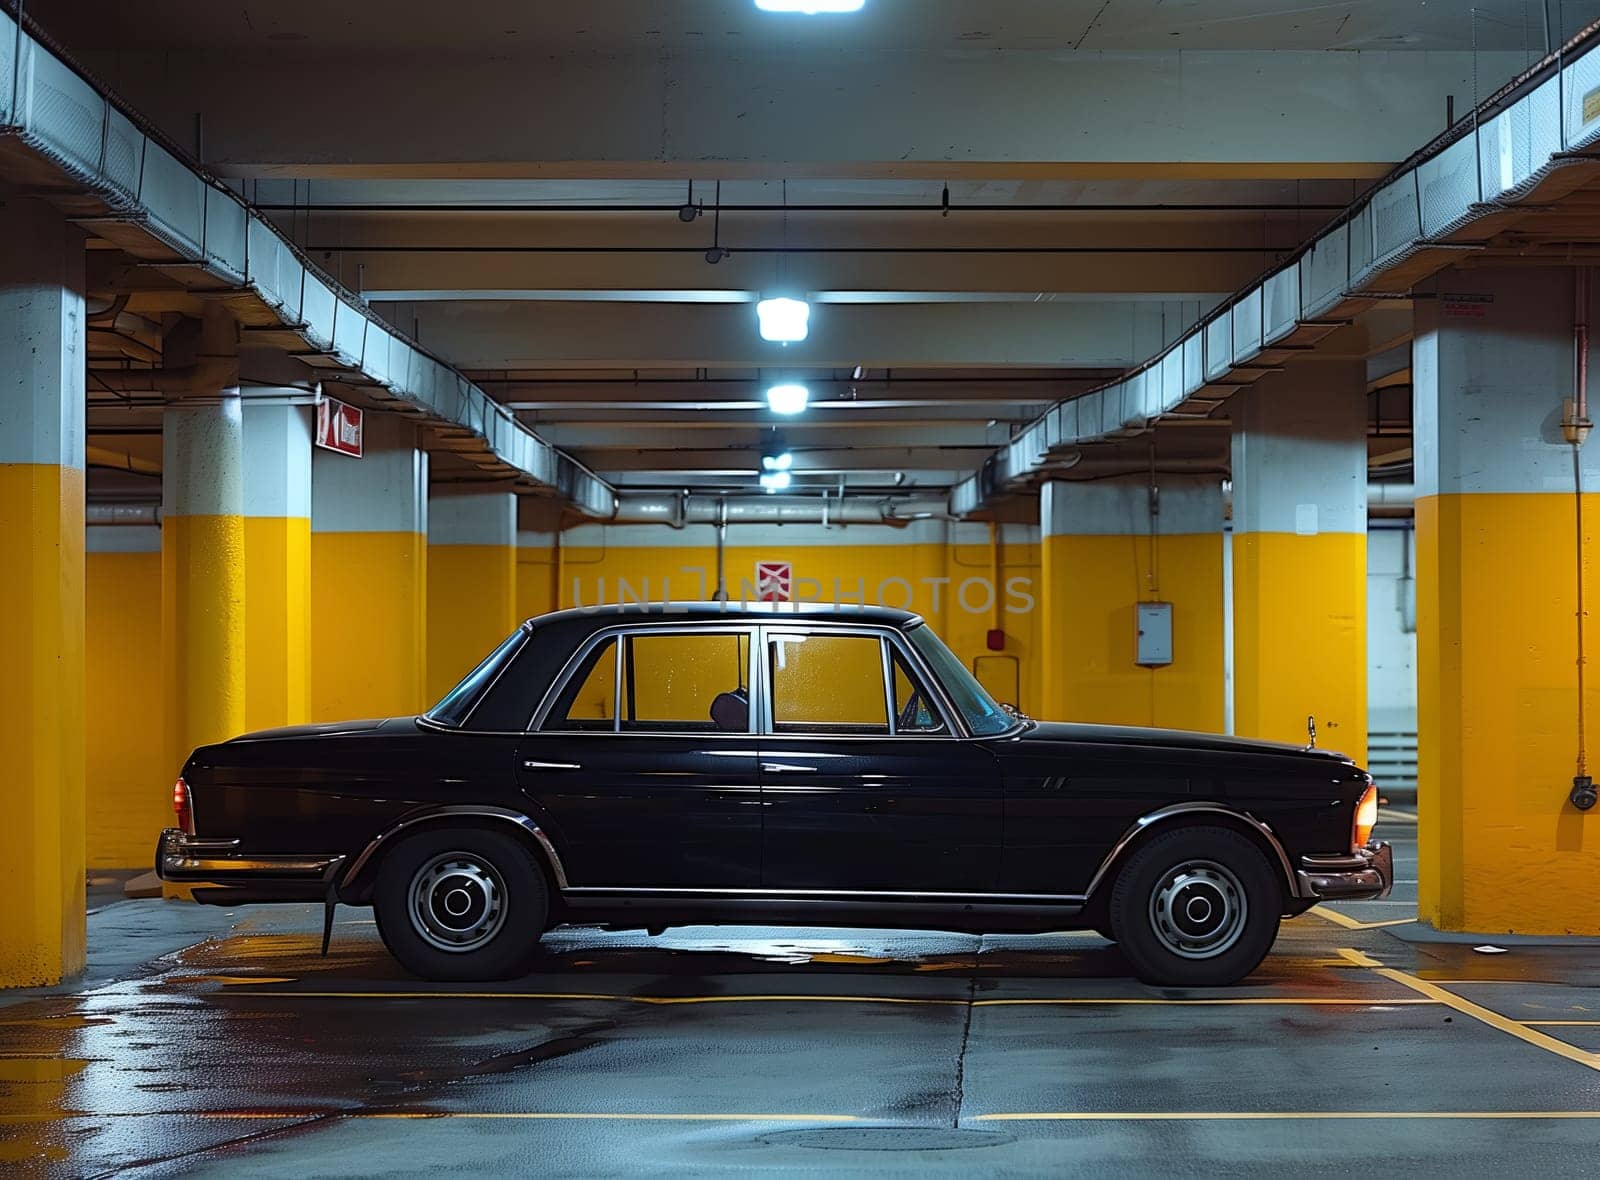 A black car with four wheels is parked in a garage with yellow pillars. The vehicle is resting on the flooring, surrounded by automotive parking lights